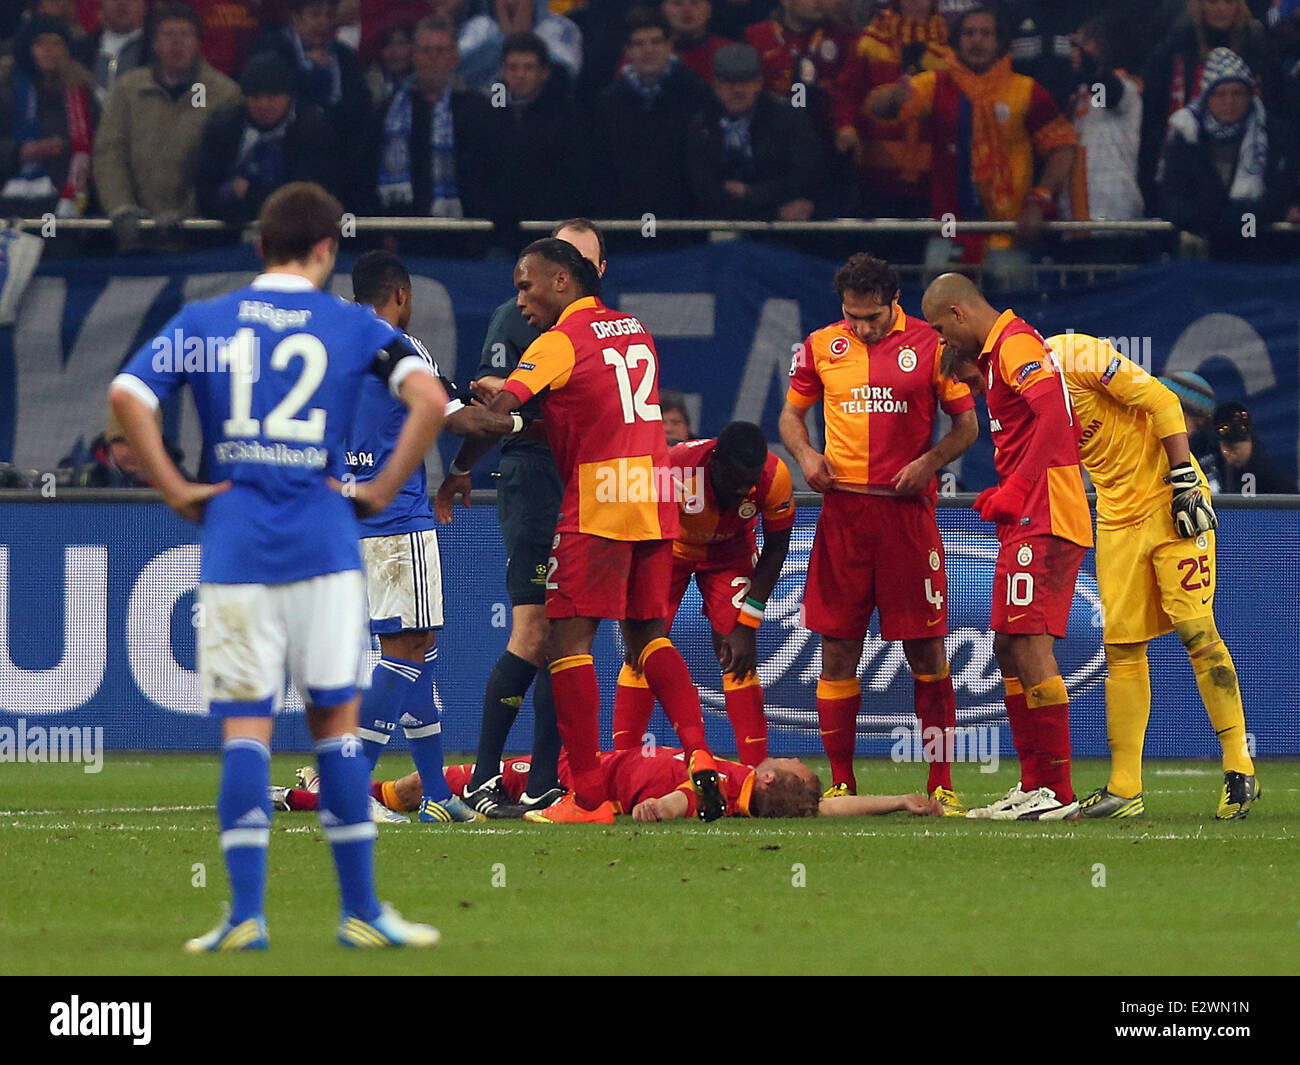 UEFA Champions League second leg match Schalke 04 vs Galatasaray at Veltins arena in Gelsenkirchen, Germany  Featuring: Didier D Stock Photo